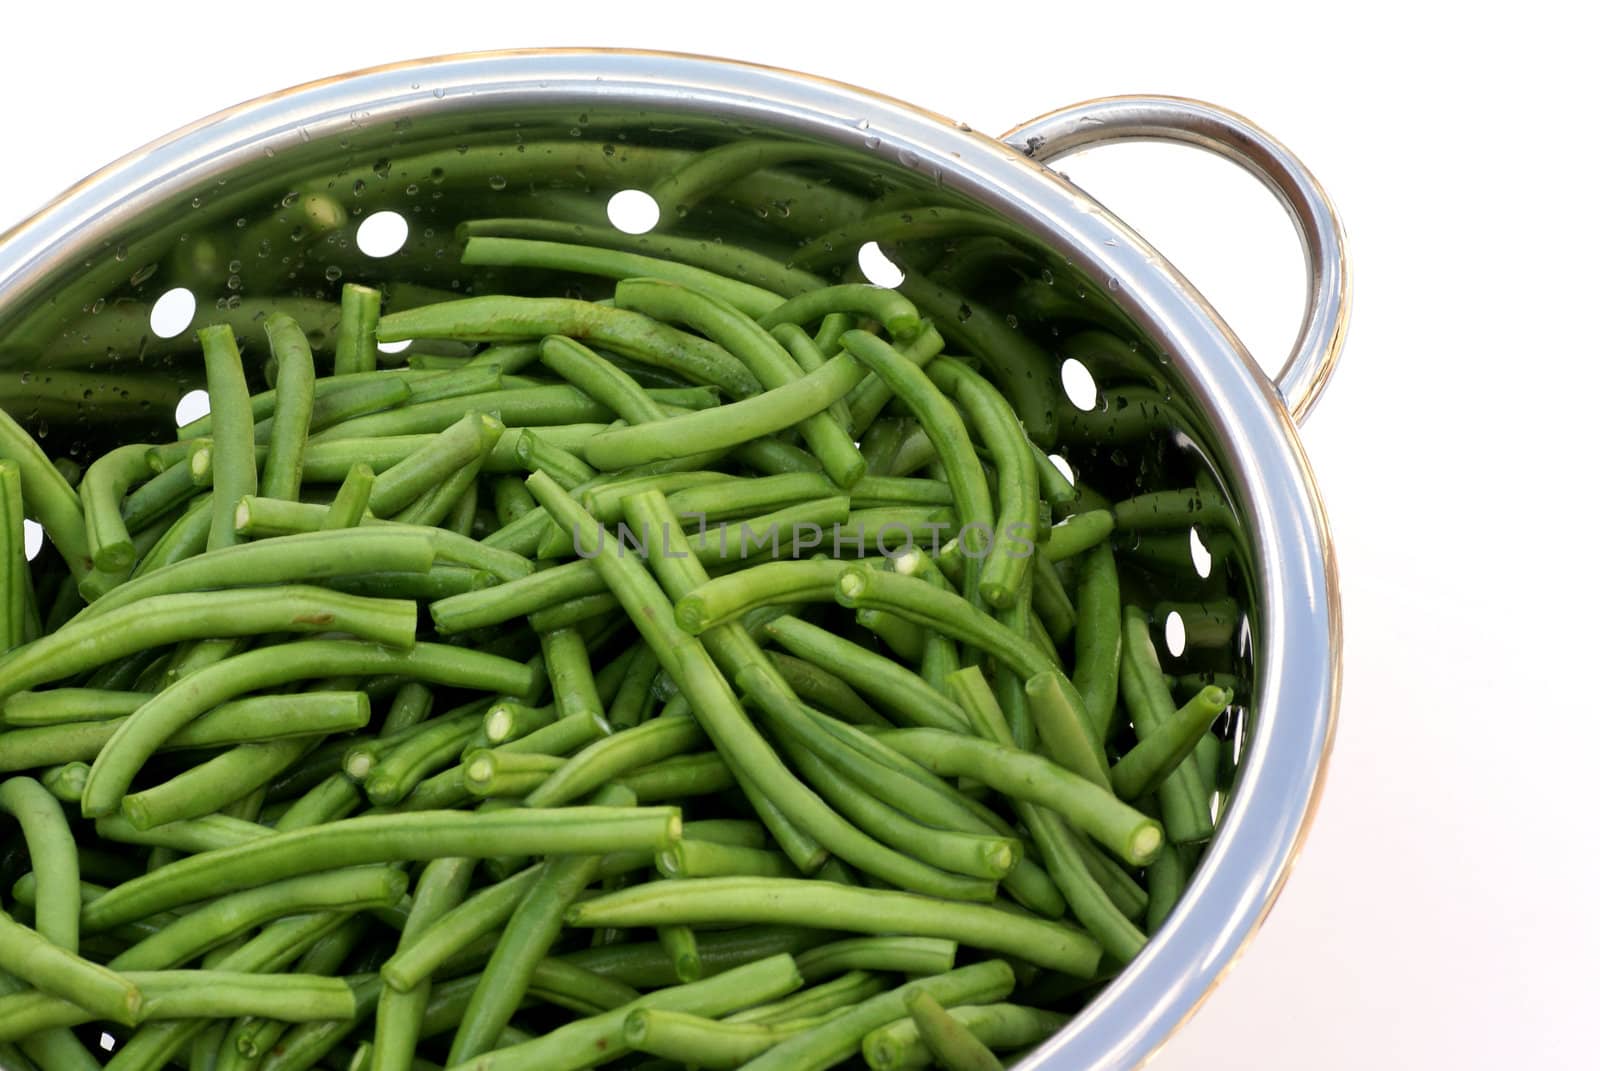 Bunch of french beans in a strainer.